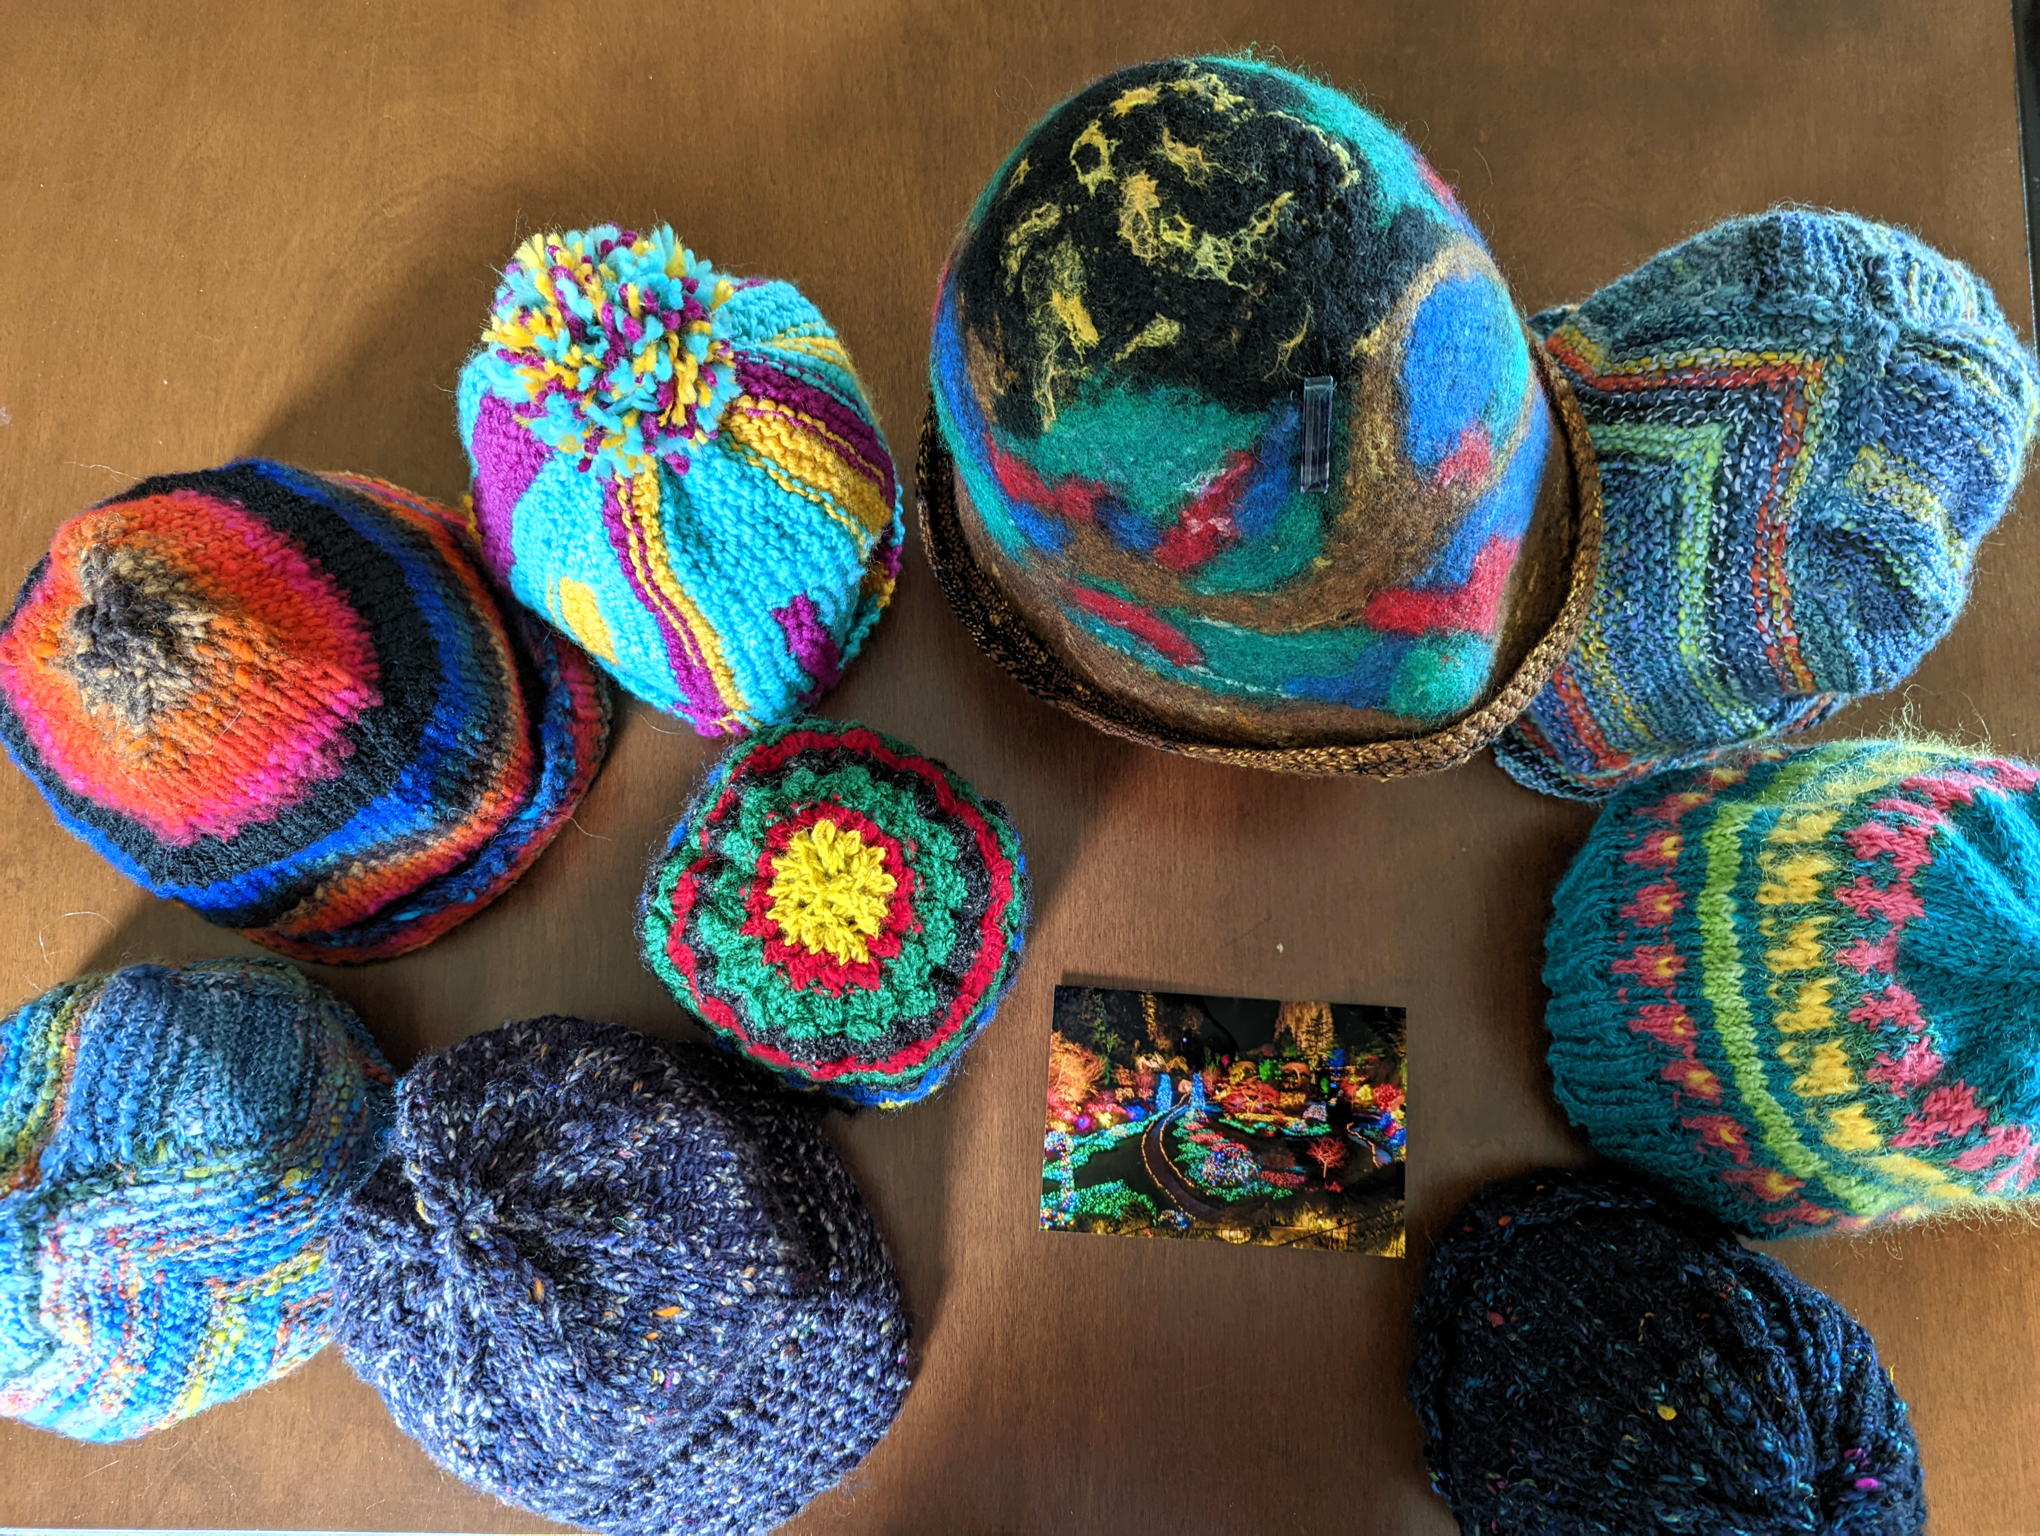 Tuesday Spinners - Hats